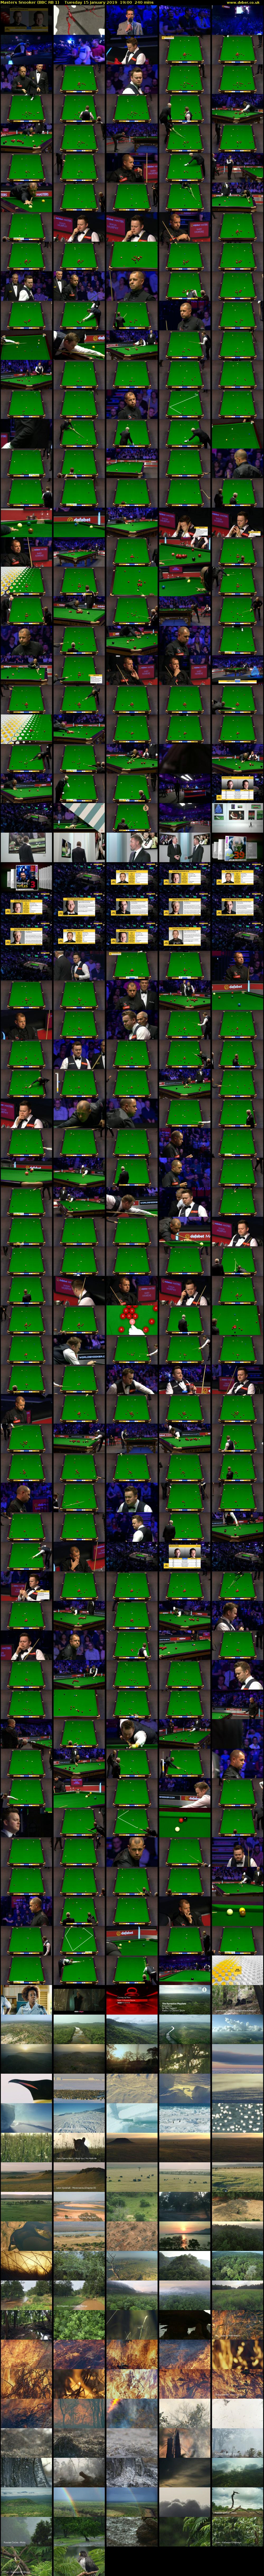 Masters Snooker (BBC RB 1) Tuesday 15 January 2019 19:00 - 23:00